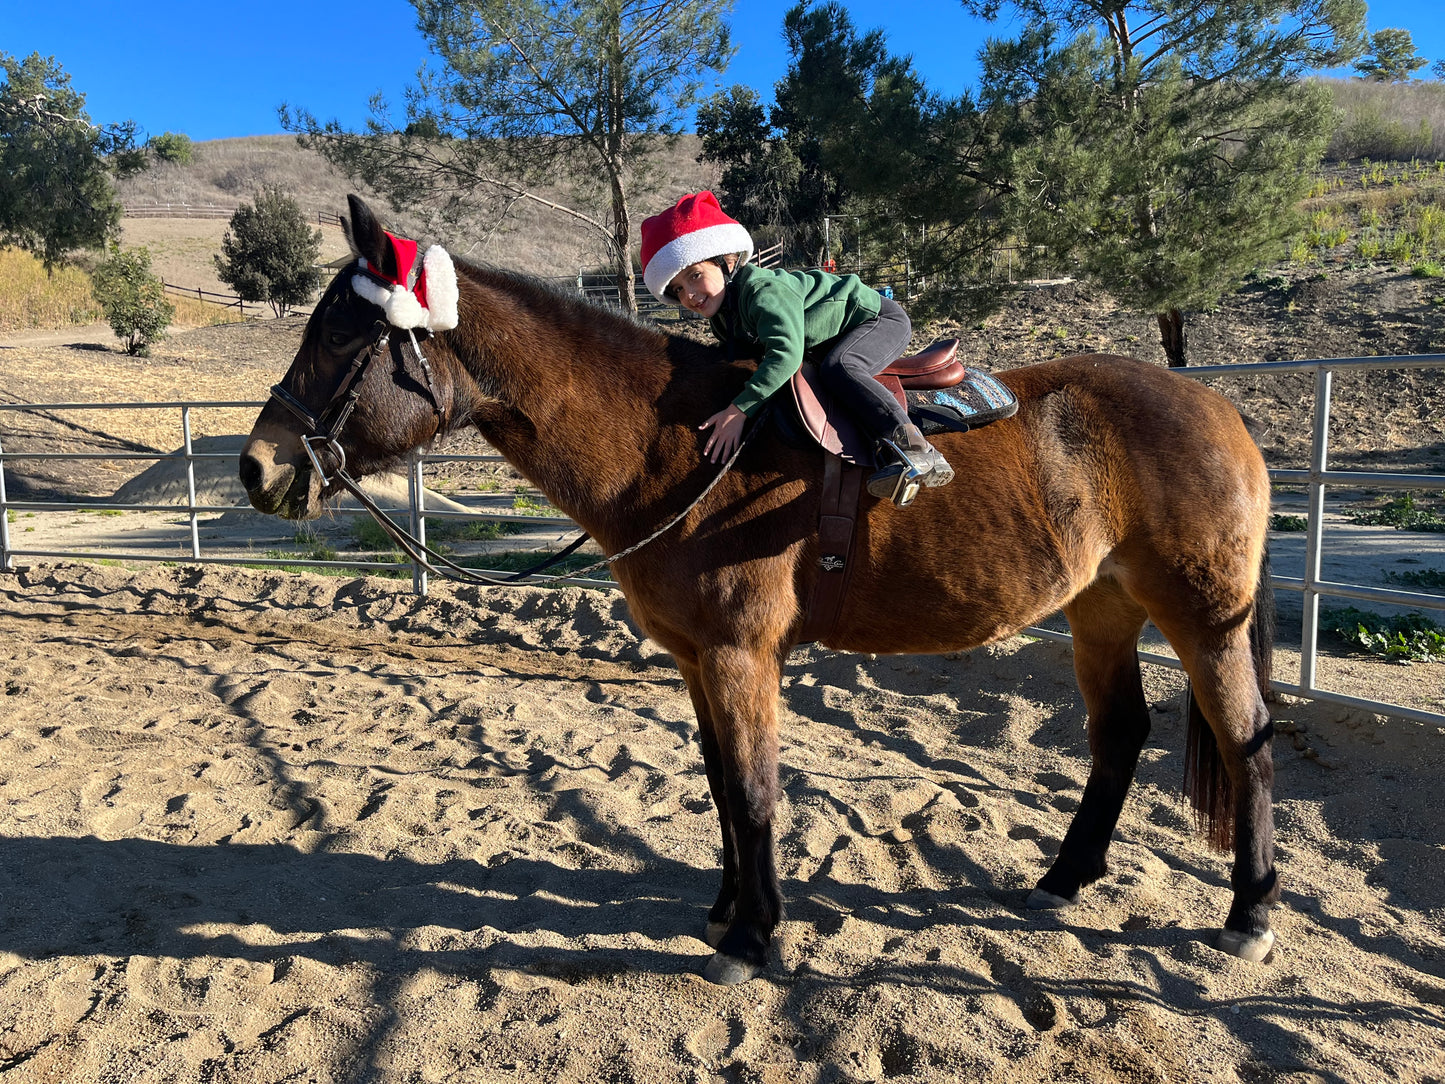 Horseback Riding in Agoura Hills! Trail Ride or Private Lessons Plus $20 Gift Card Just $67 at Horsemanship Redefined. (Value $145) All Levels! May Buy Three Per Person.